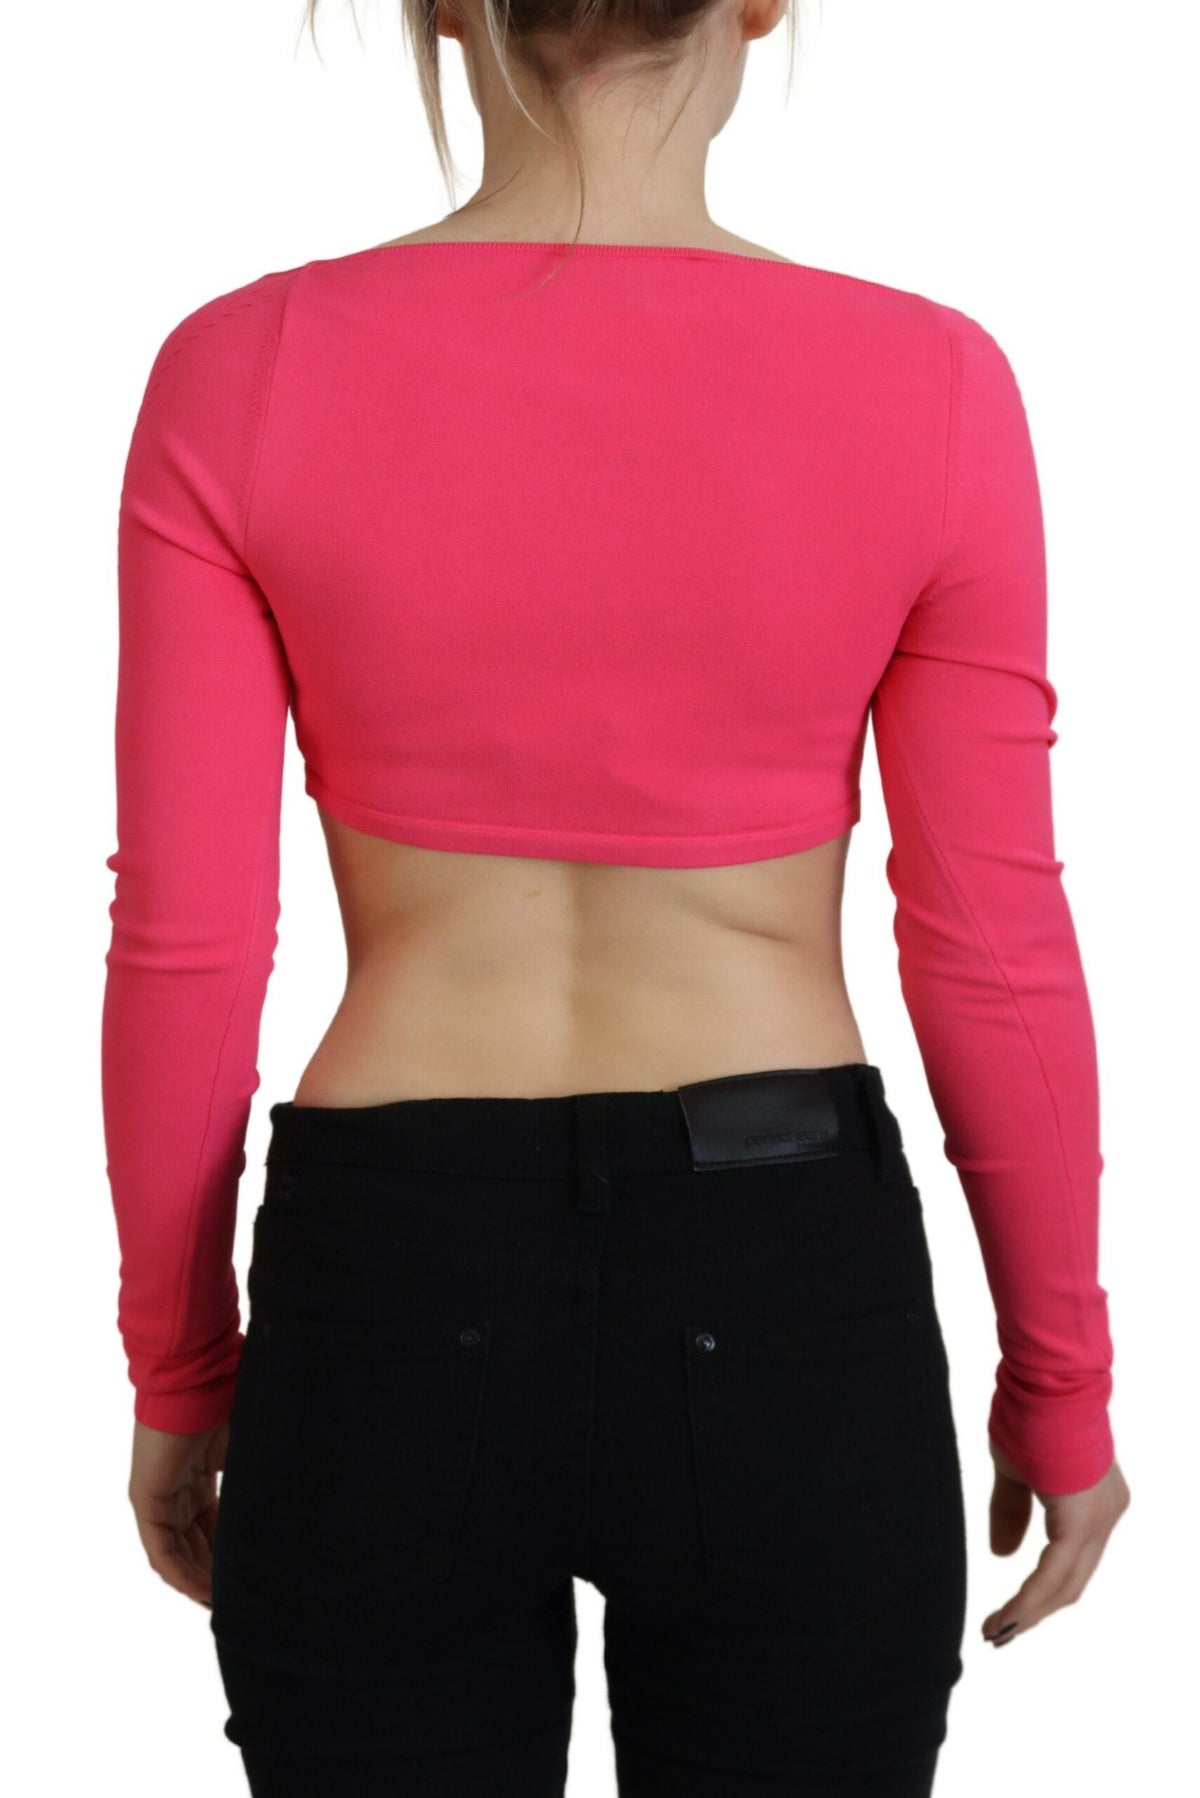 Dsquared² Pink Viscose Knit Square Neck Long Sleeves Top